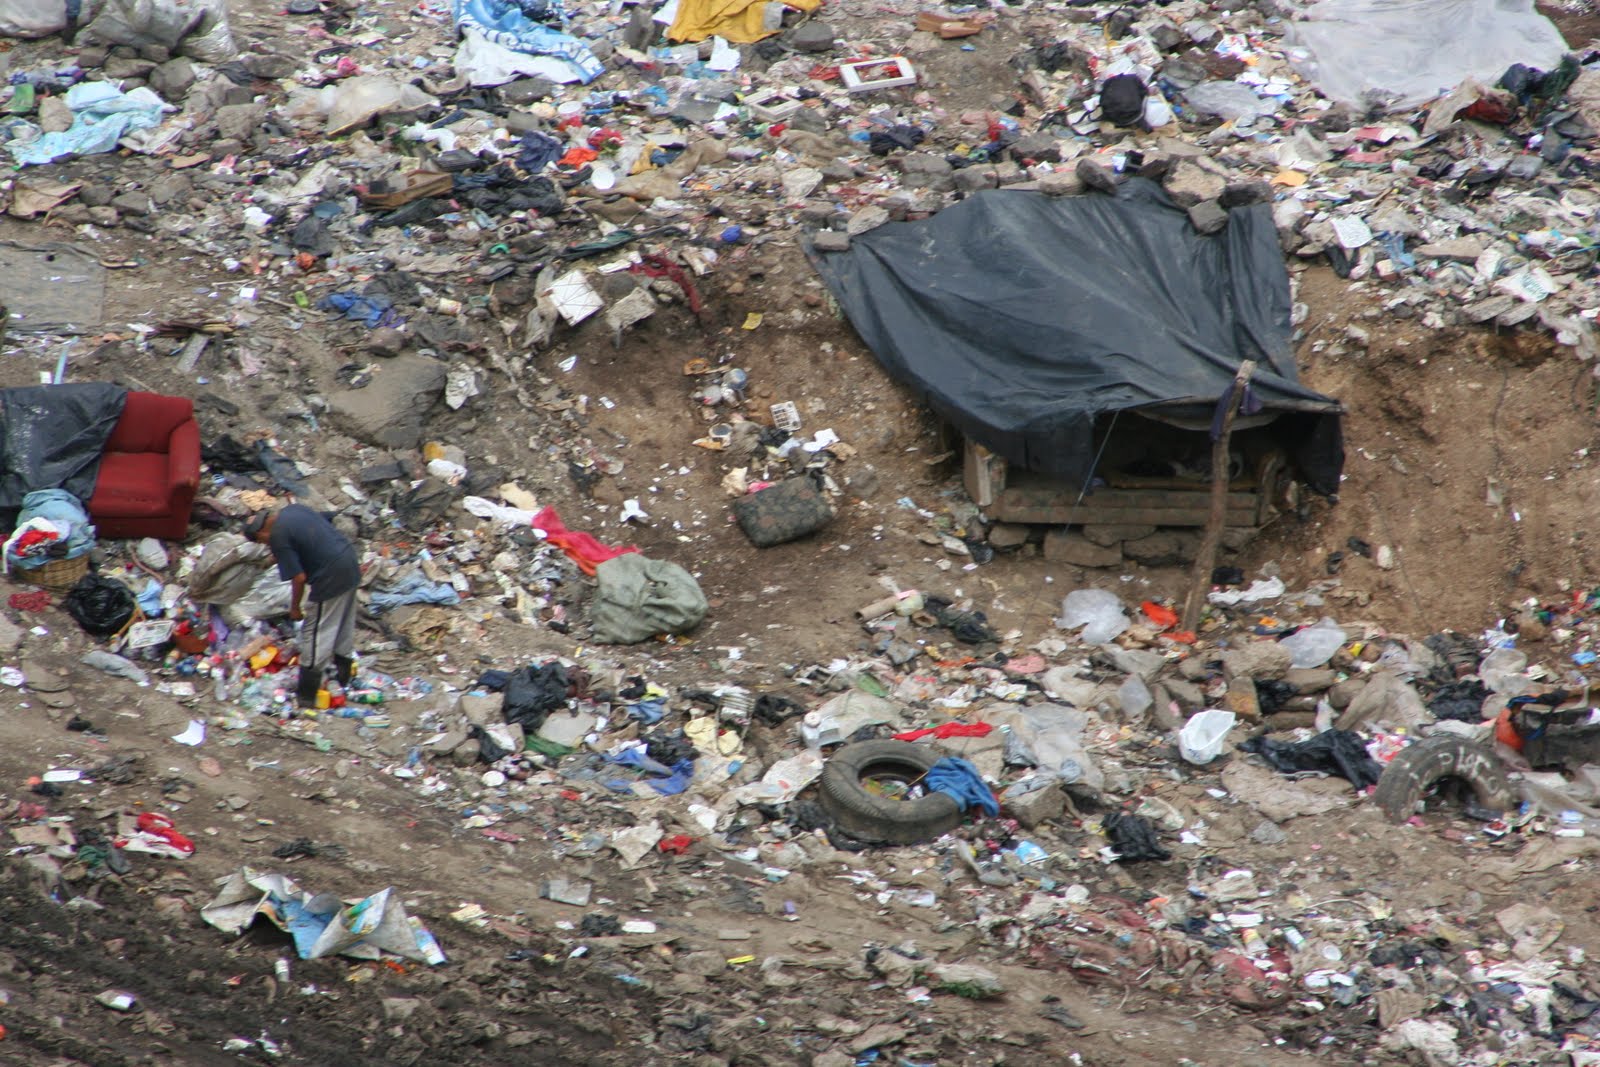 People who live in the dump